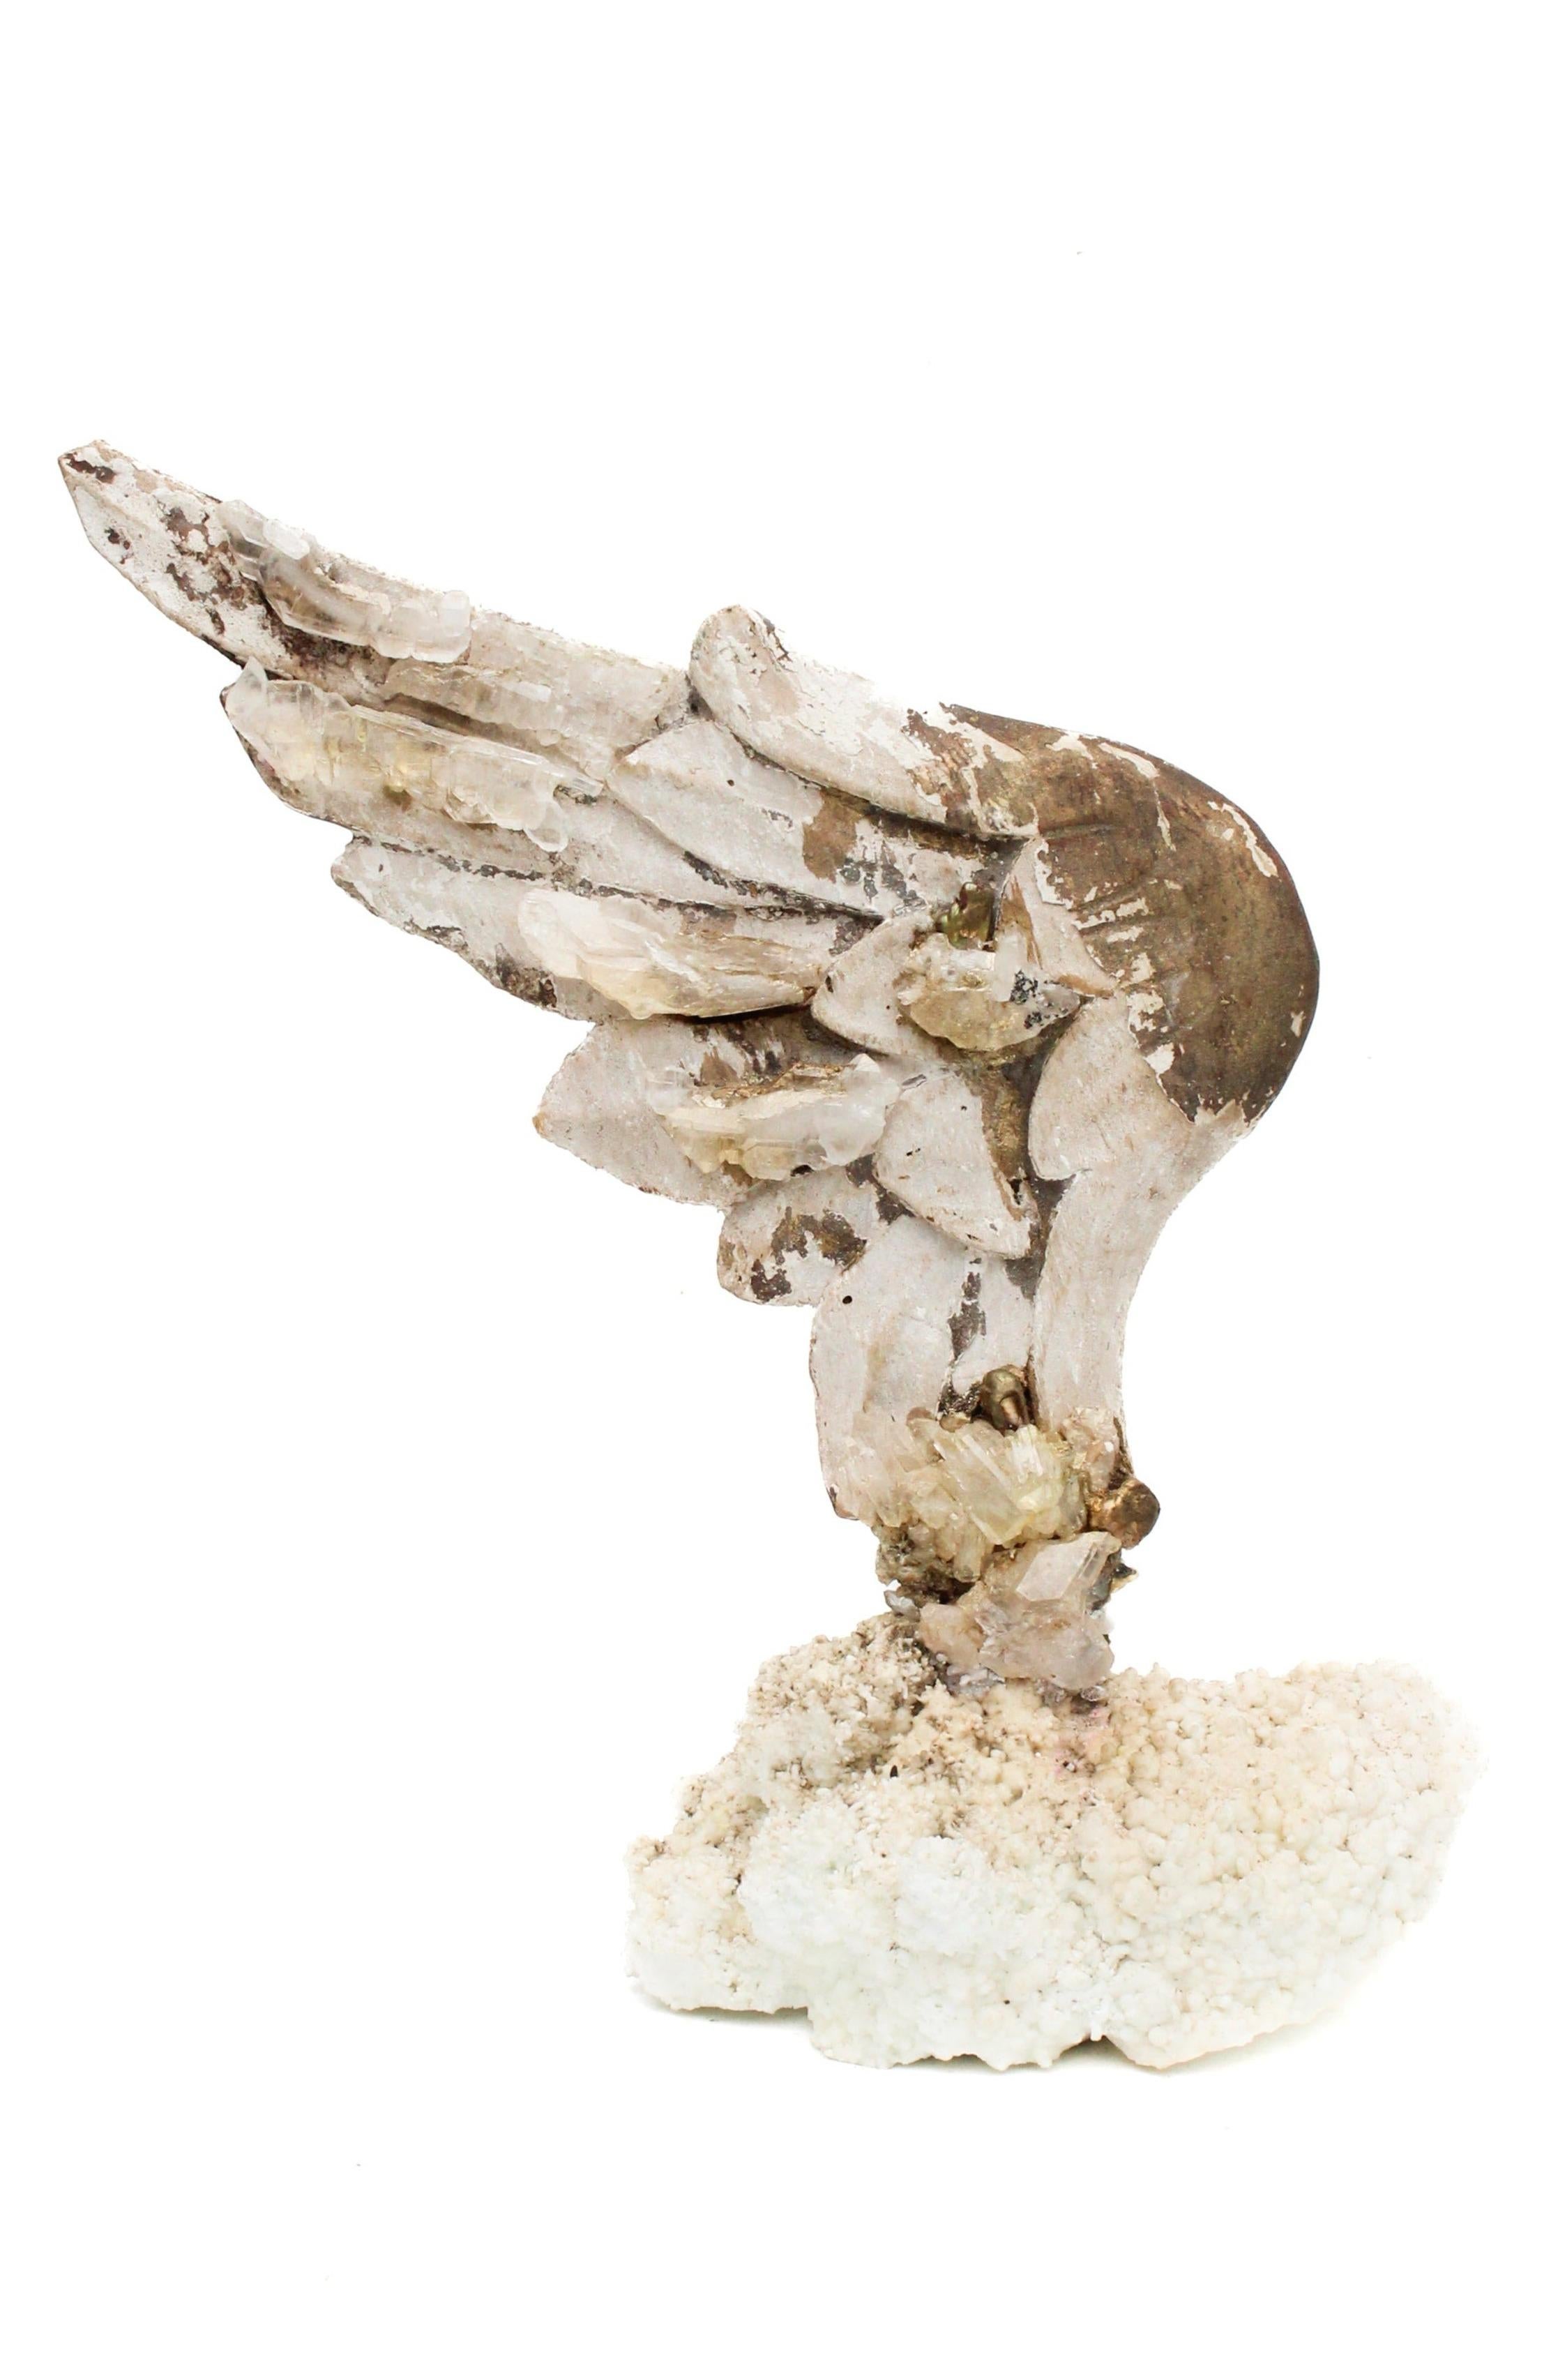 Sculptural 18th century Italian hand-carved angel wing mounted on white aragonite and adorned with faden crystals, crystal quartz, and baroque pearls. The hand-carved angel wing was once part of a heavenly, angelic depiction in a historic church in